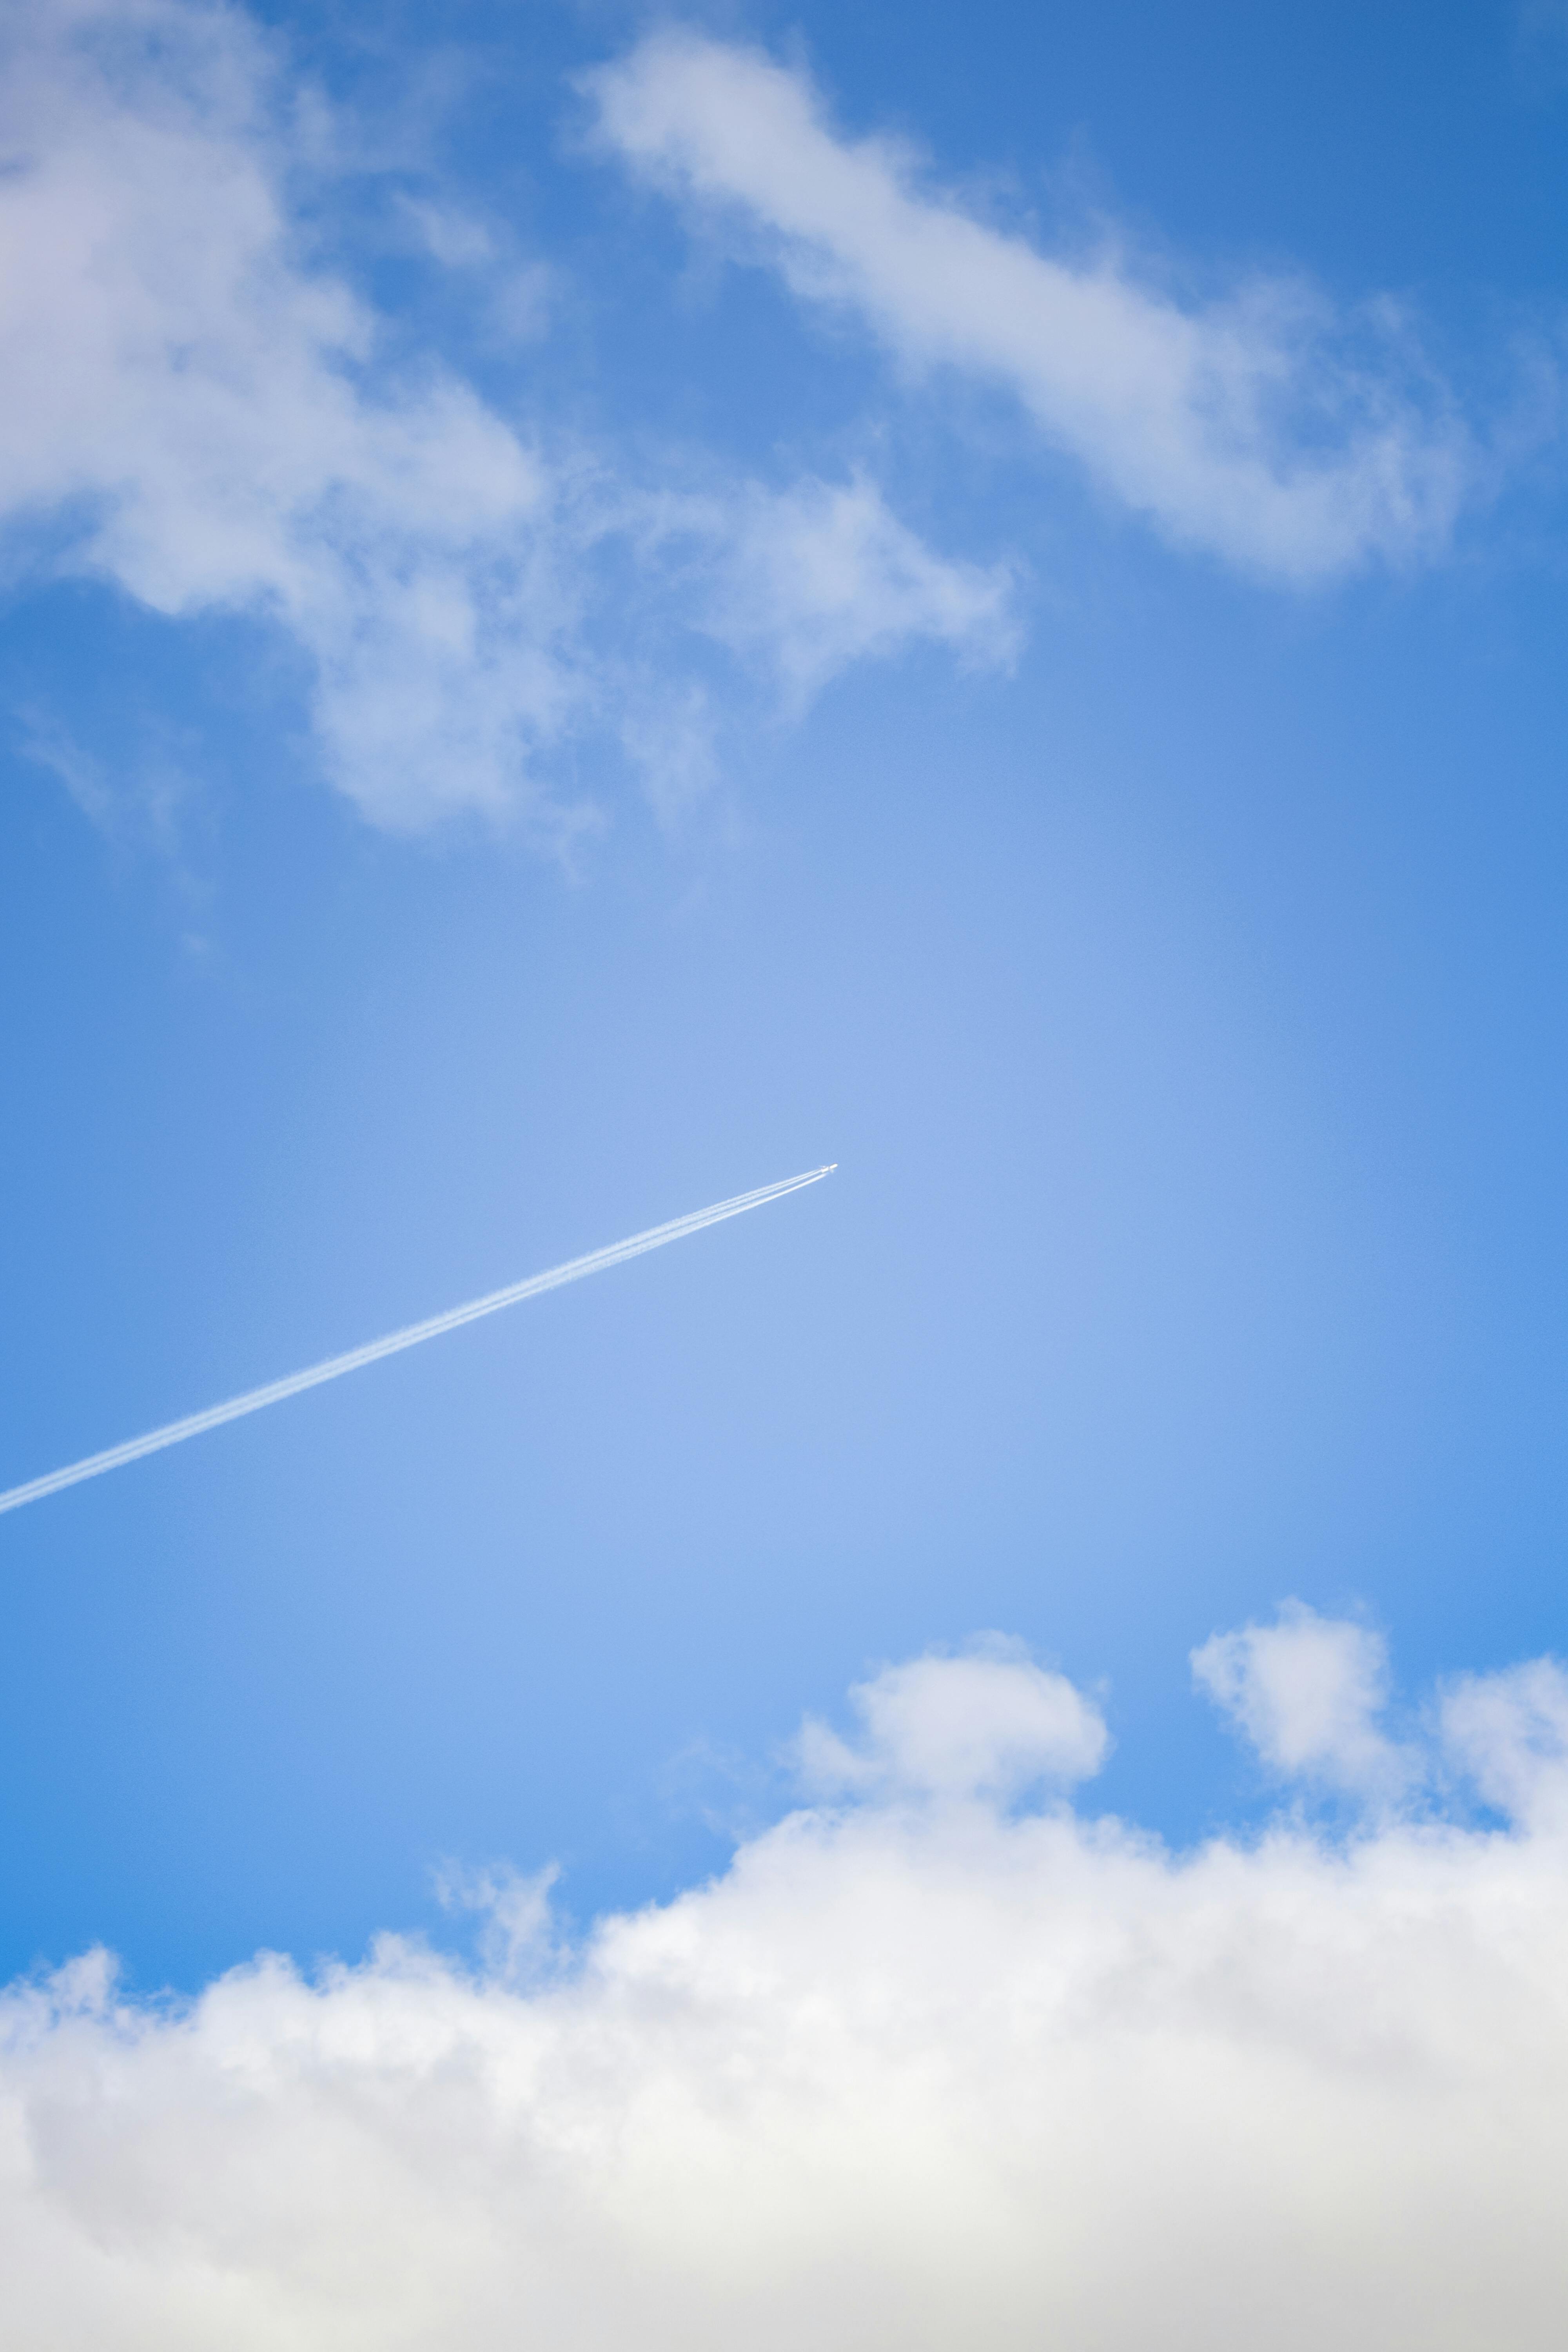 Airplane Leaving Vapor Trail in Sky · Free Stock Photo